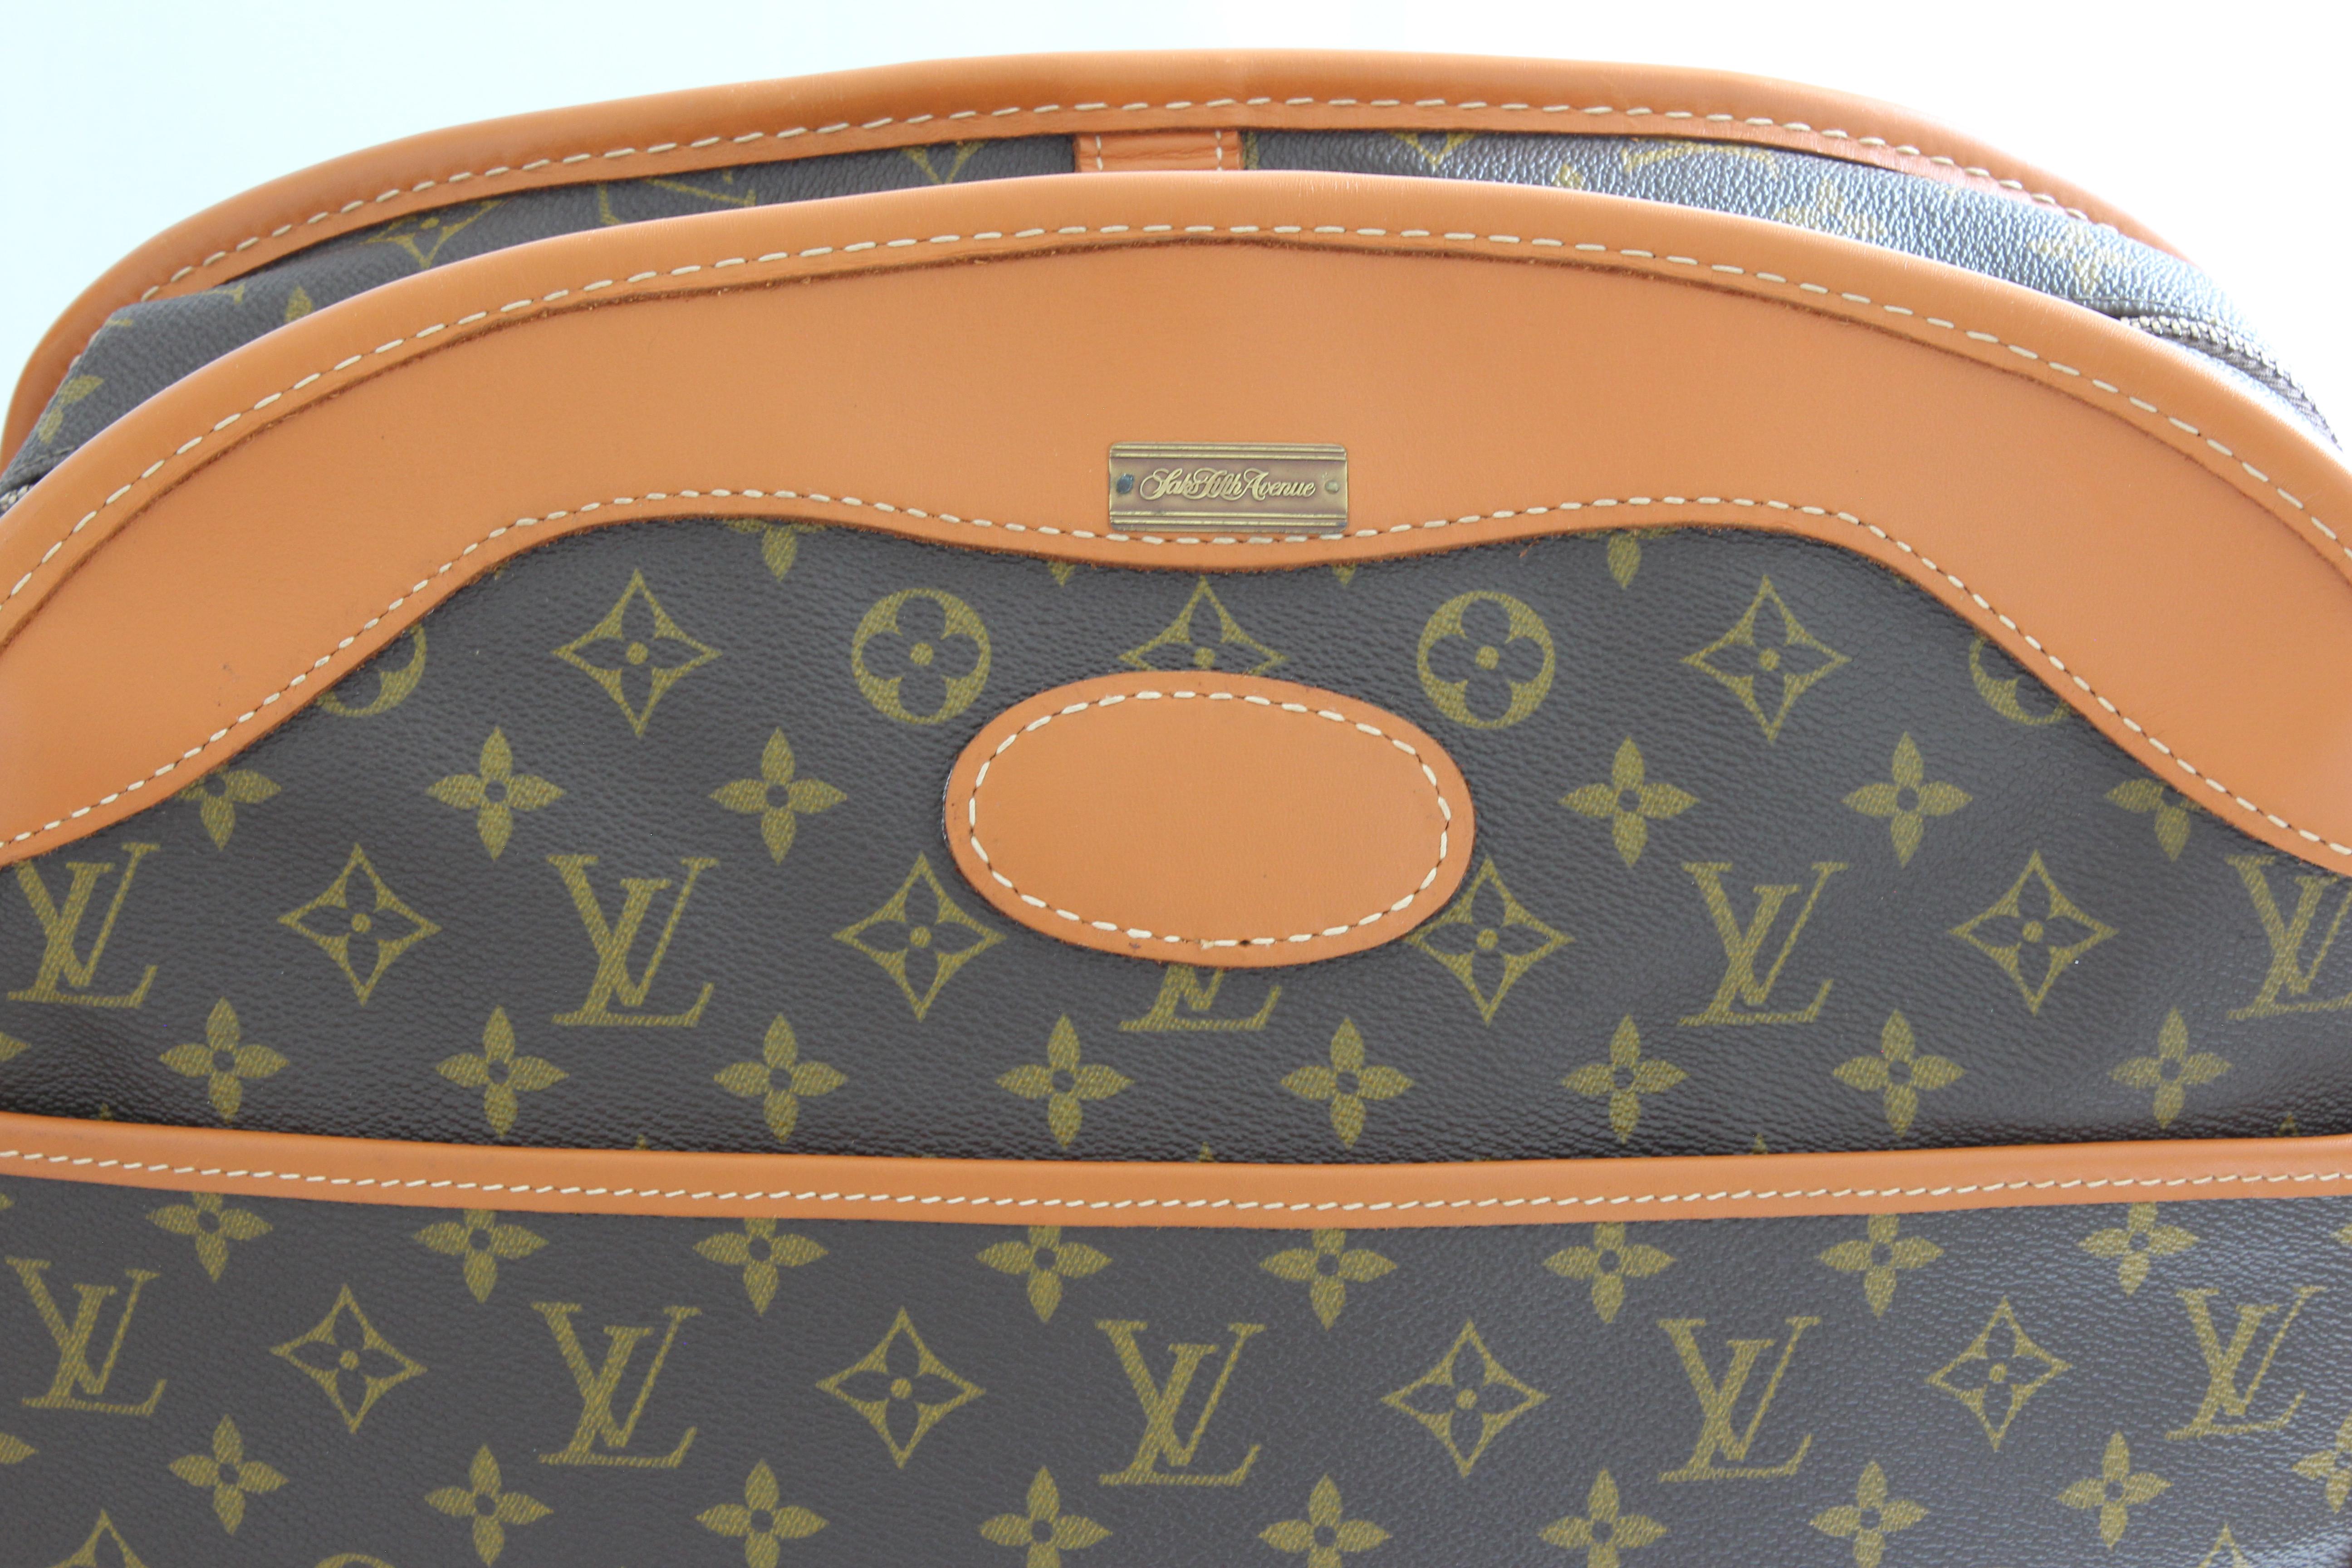 Louis Vuitton Monogram Travel Bag Carry On Shoulder Bag French Co New Old Stock 1